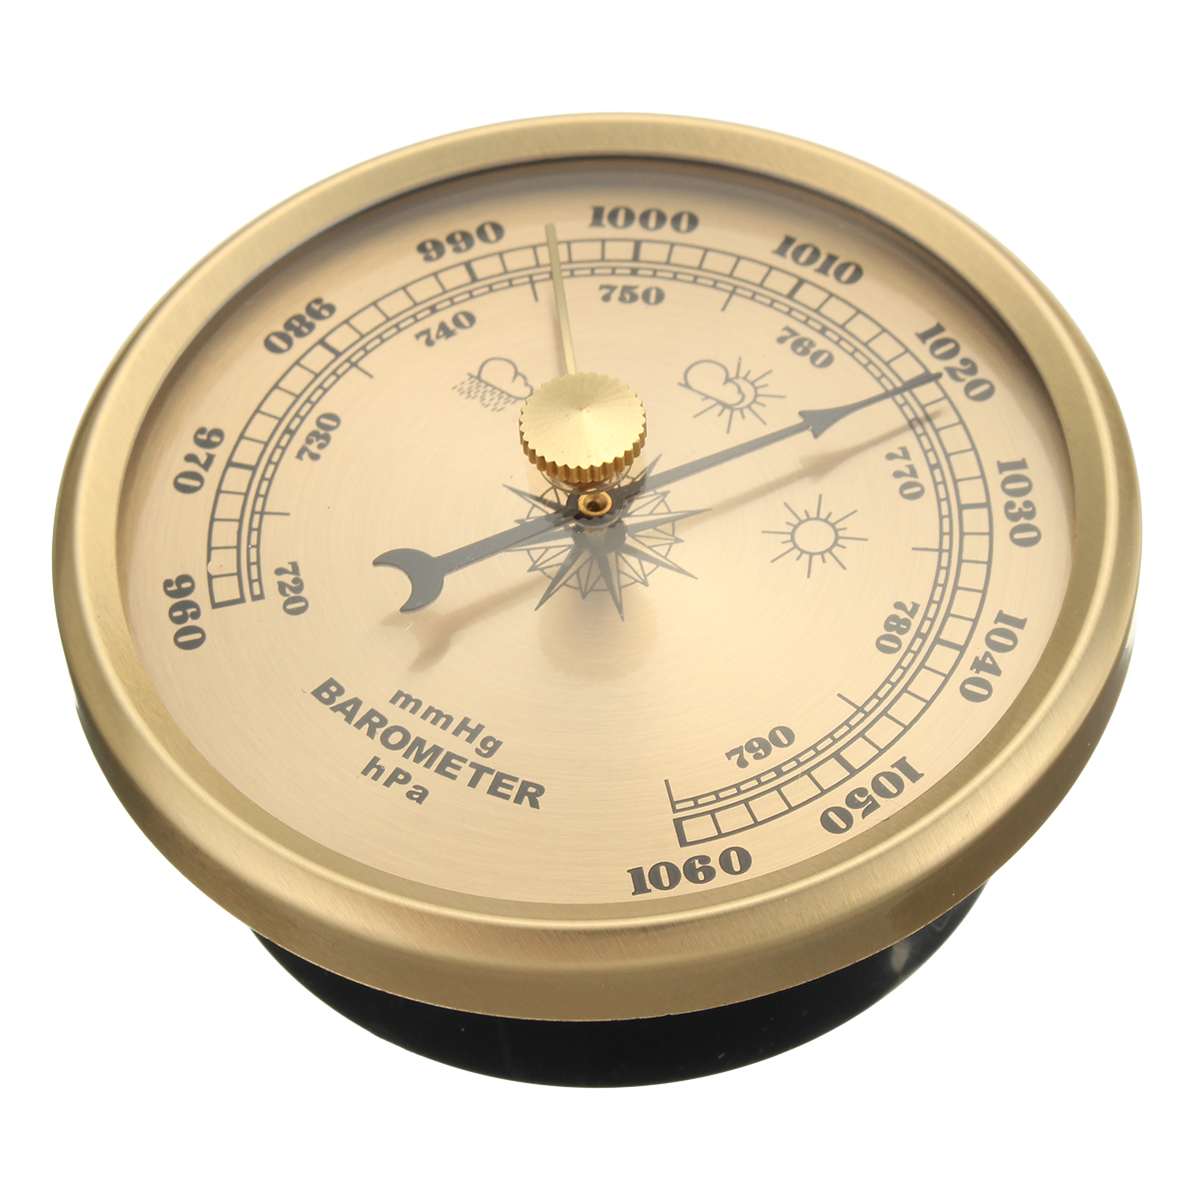 Find 960 1060hPa Barometer Air Pressure Gauge Weatherglass Weather Meter Wall Hanging for Sale on Gipsybee.com with cryptocurrencies